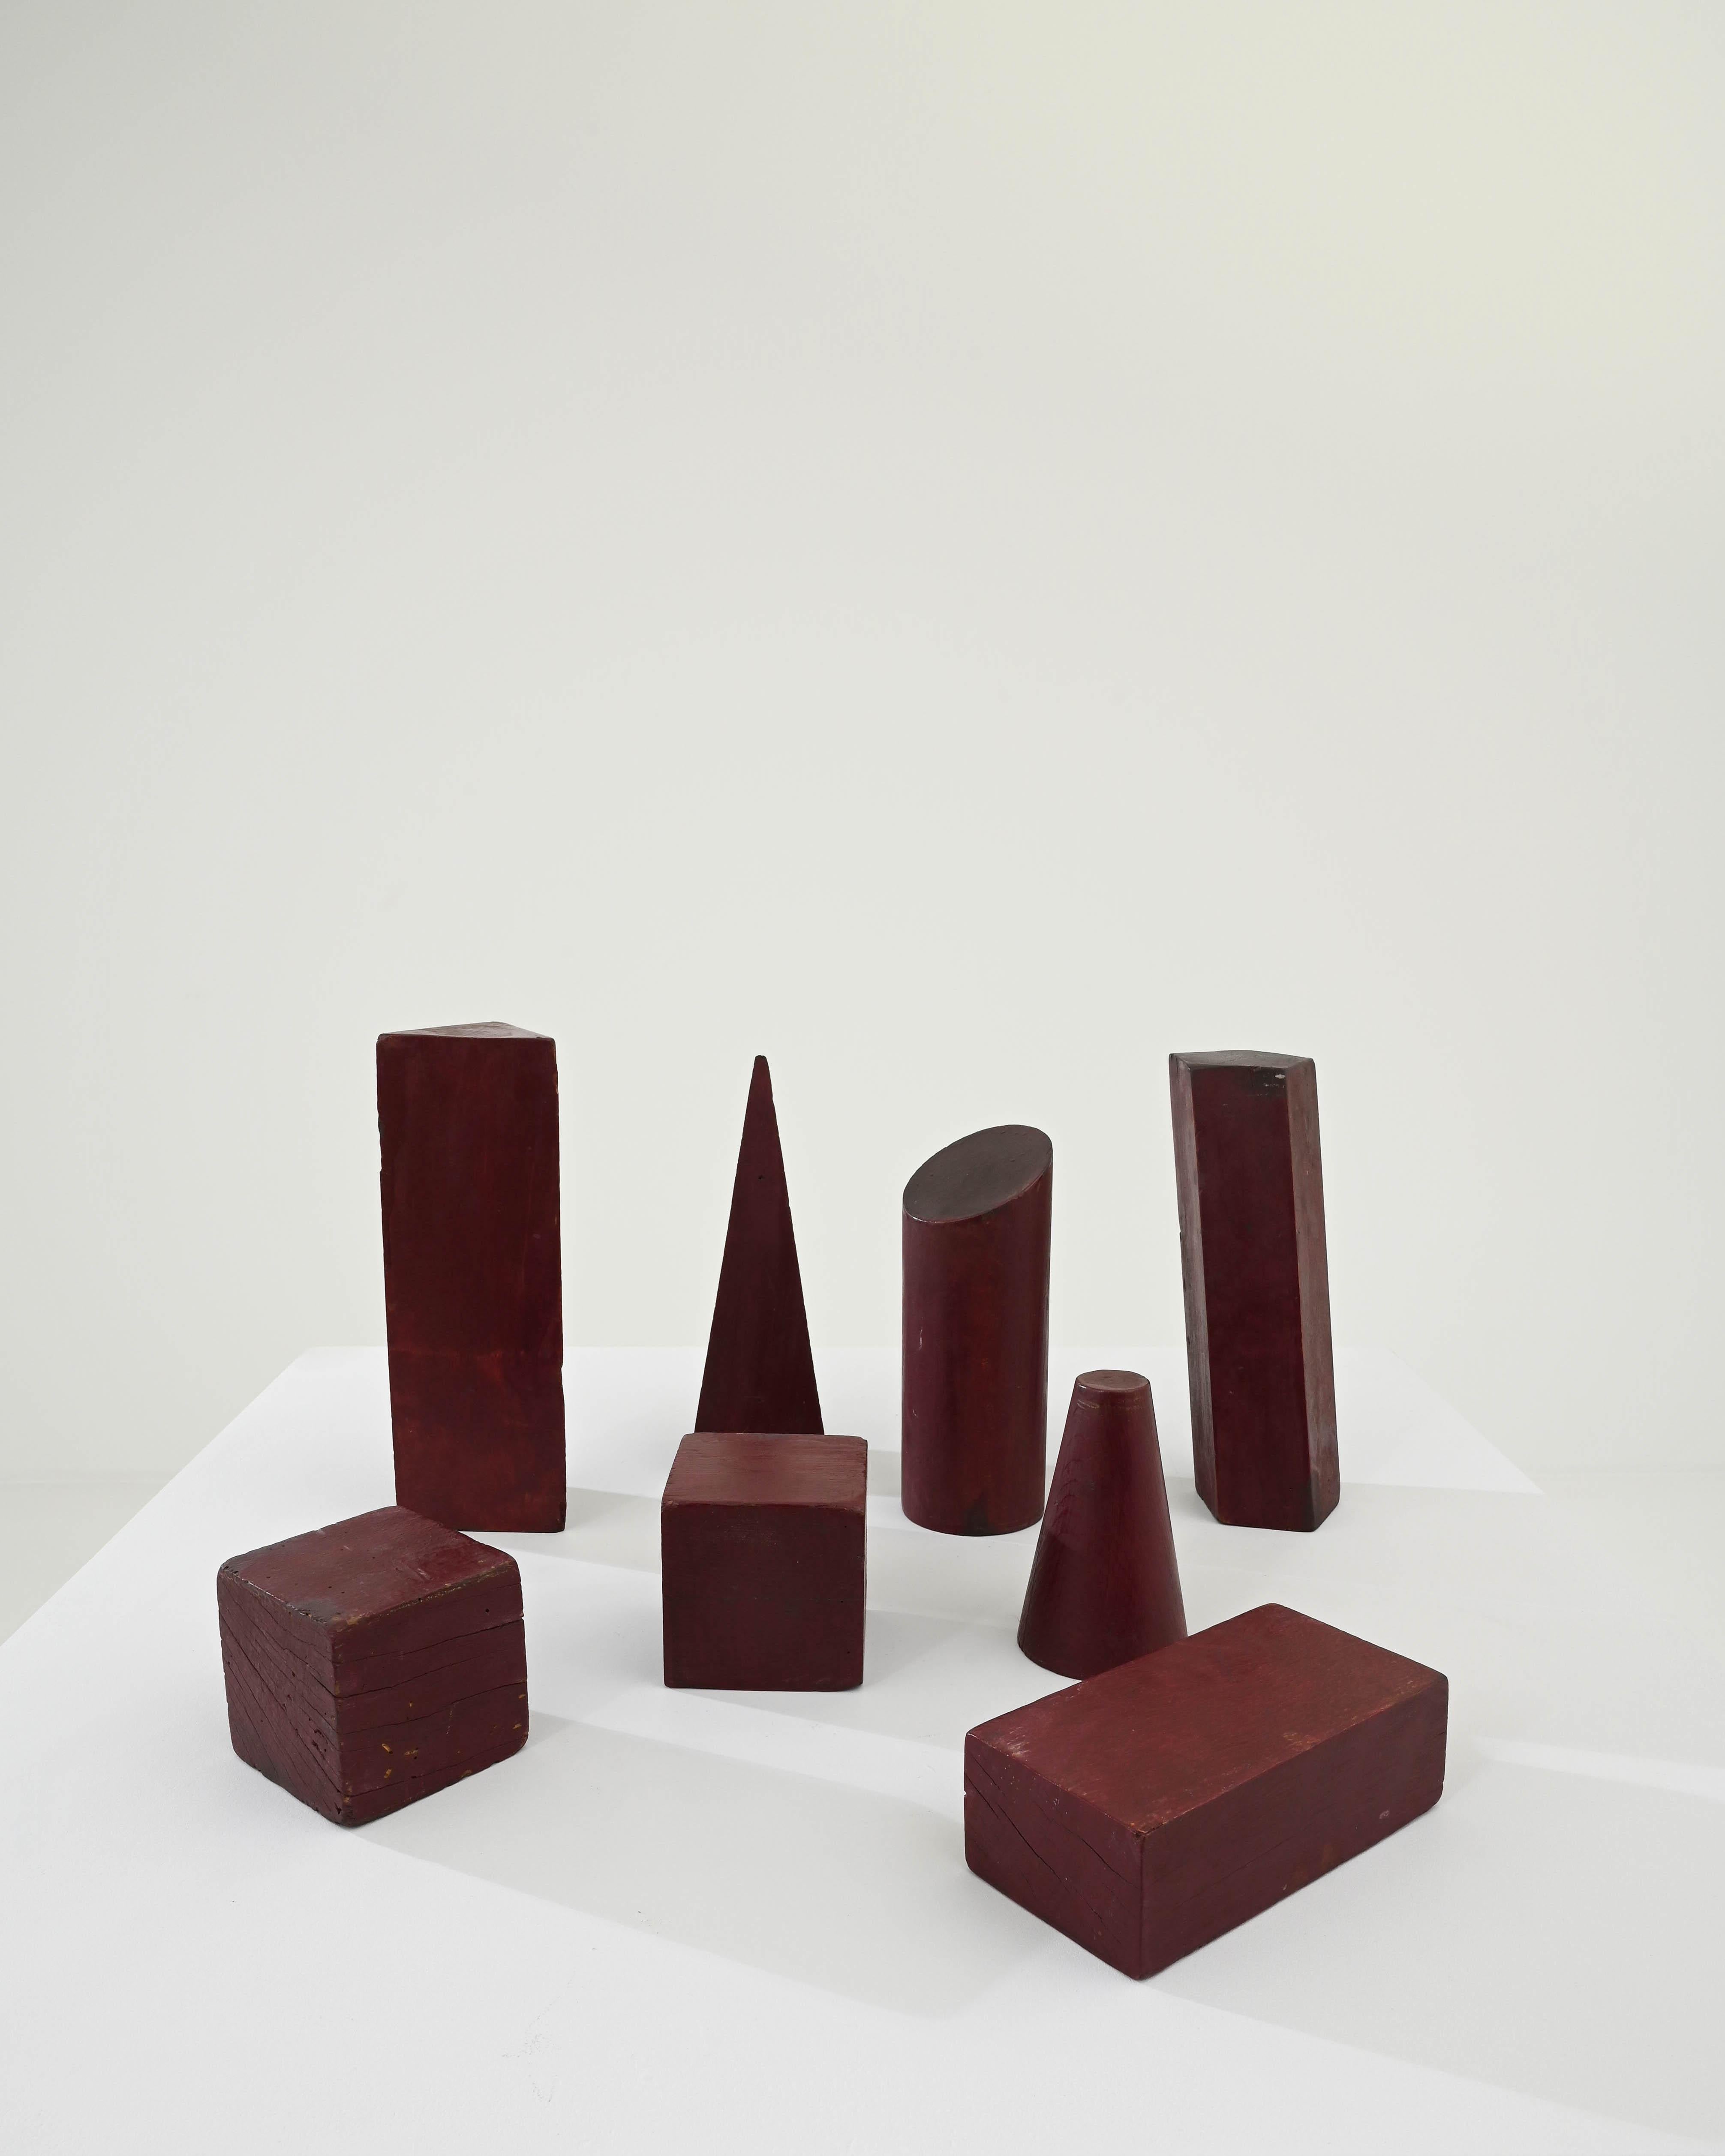 A set of wooden decorations created in 20th century Belgium. A motley cast of characters, these geometric solids gather round, casting overlapping shadows together. Underneath the dark and warm maroon paint one can make out the wood grain below,